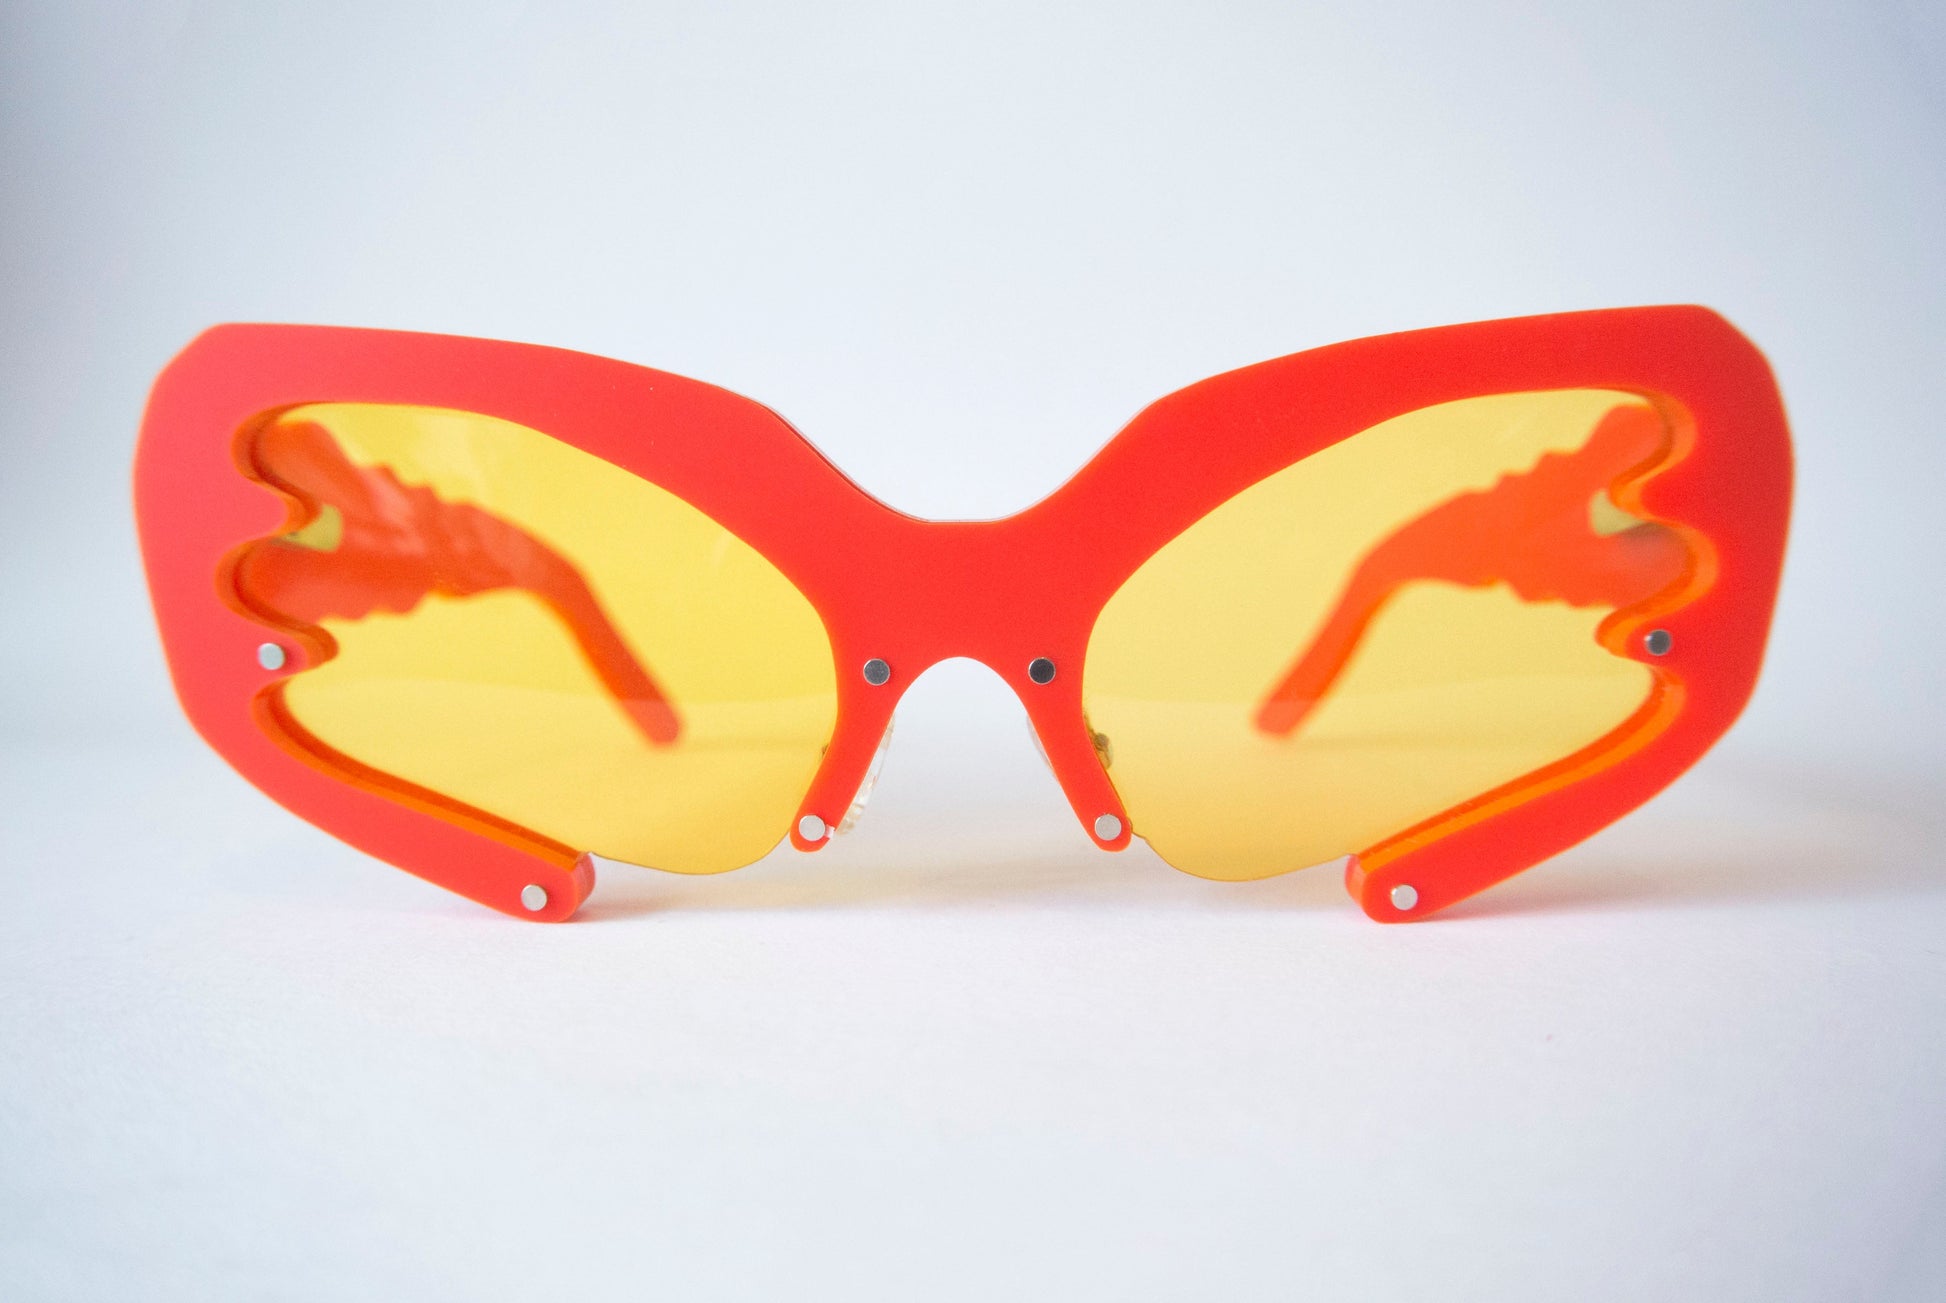 Bright red bug Y2K style glasses with yellow lenses